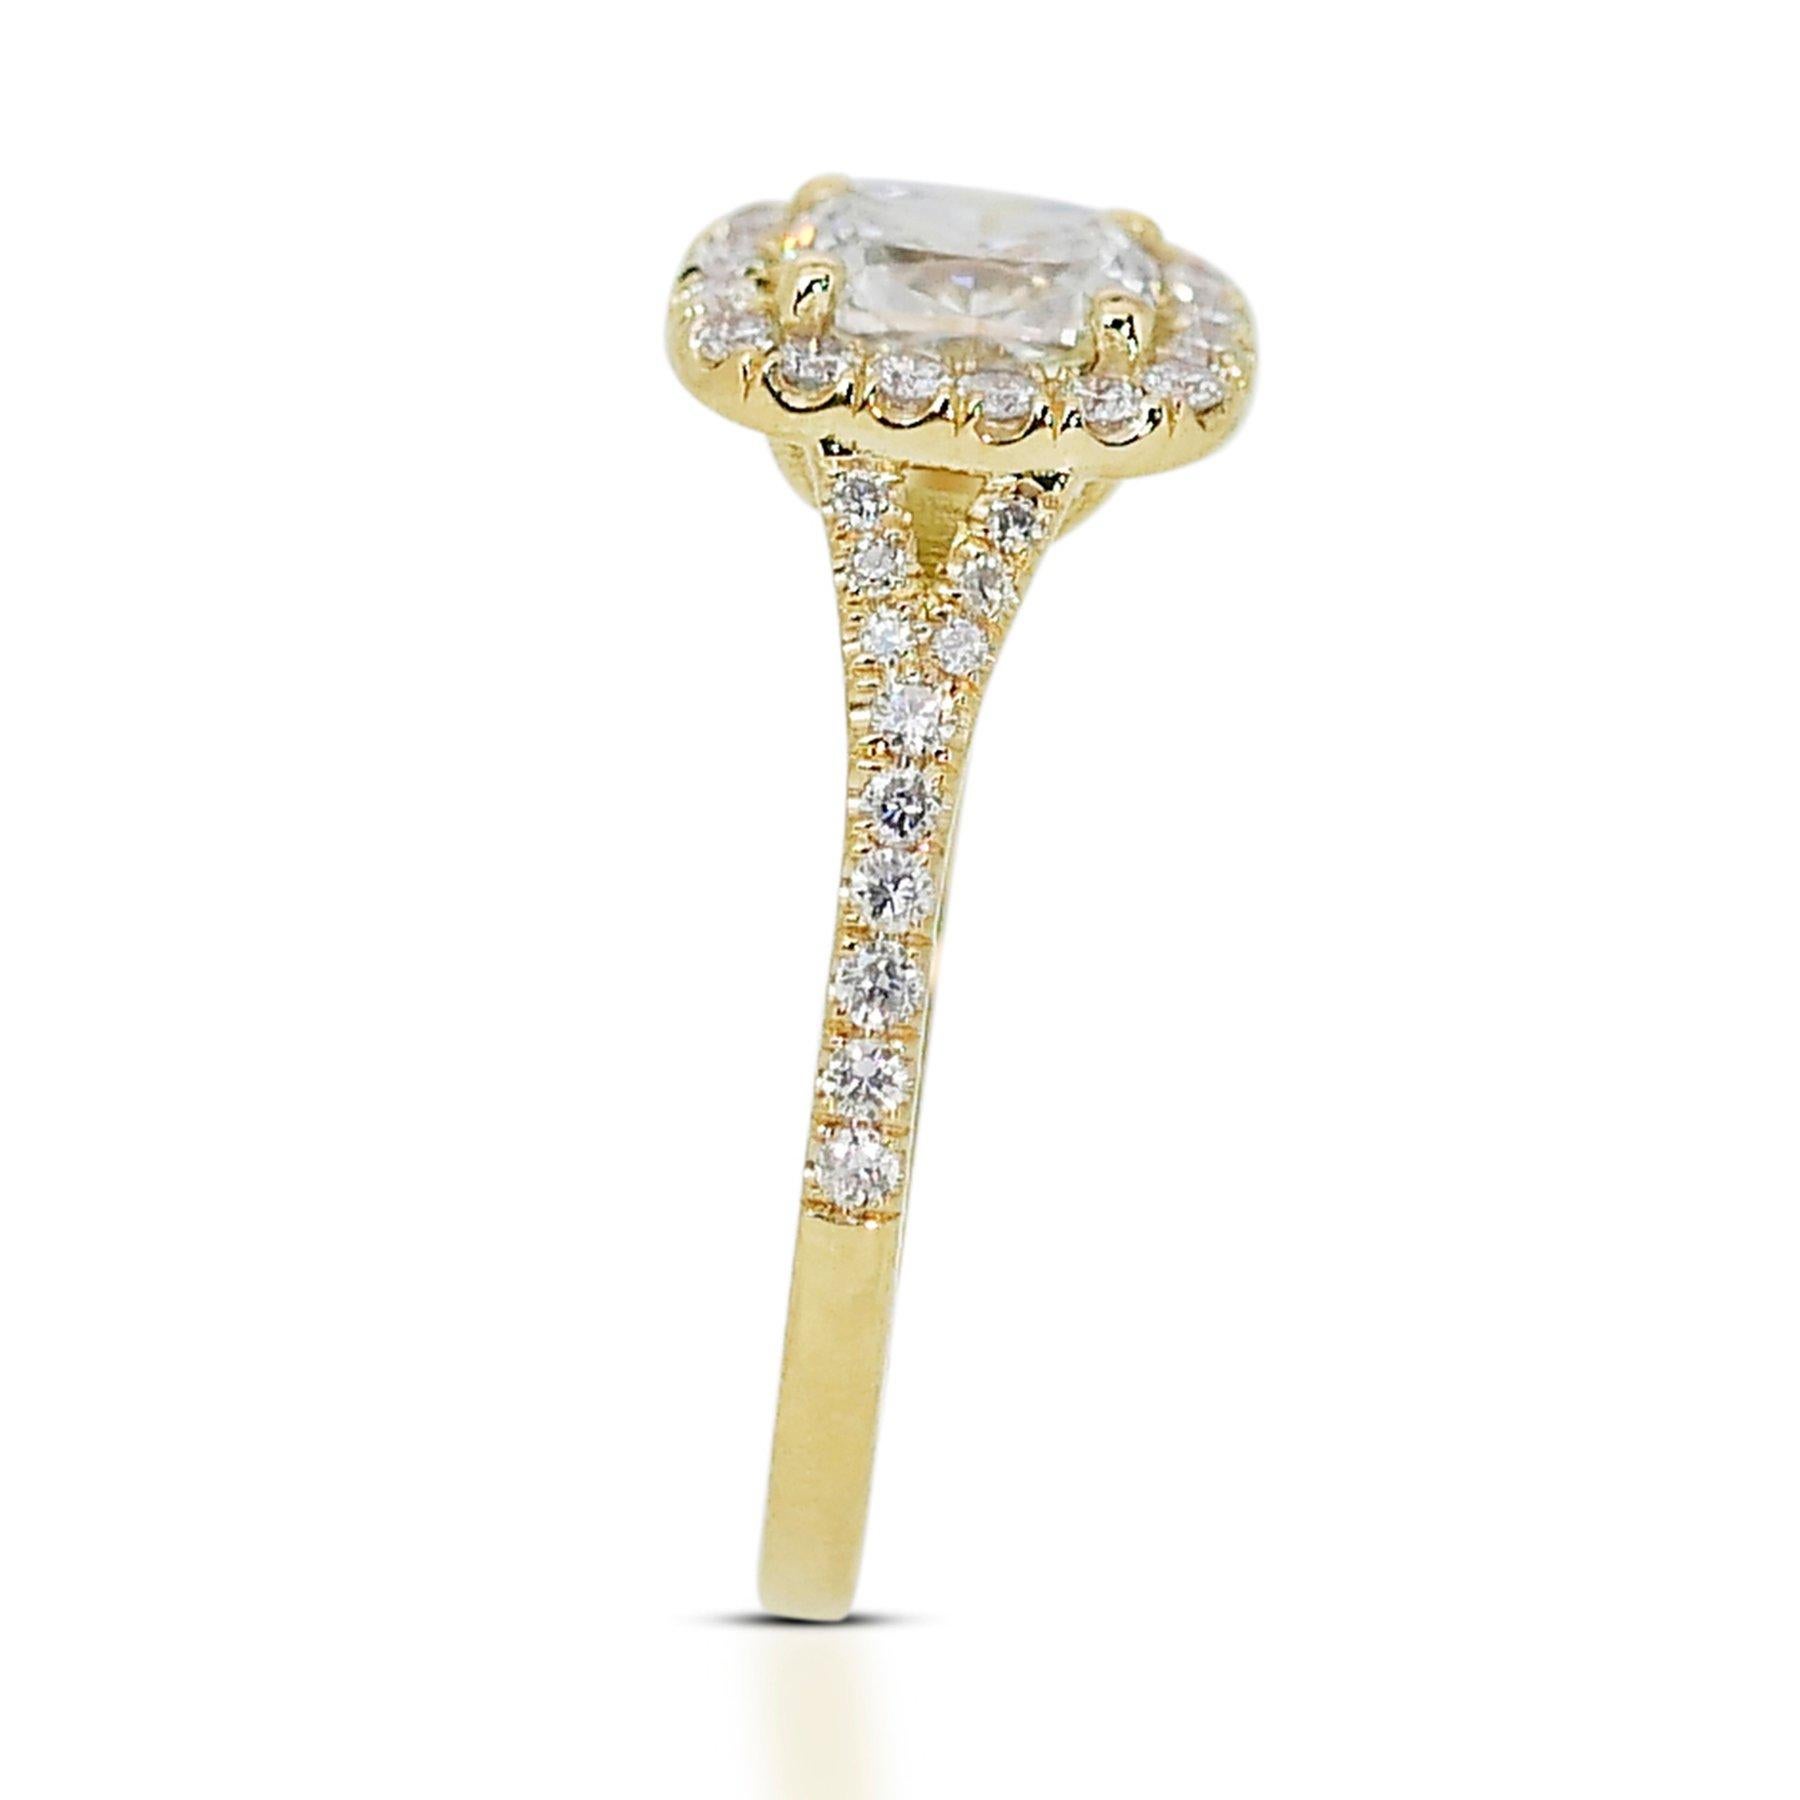 Taille coussin Brilliante 1.33ct Diamond Halo Ring in 18k Yellow Gold - GIA Certified en vente